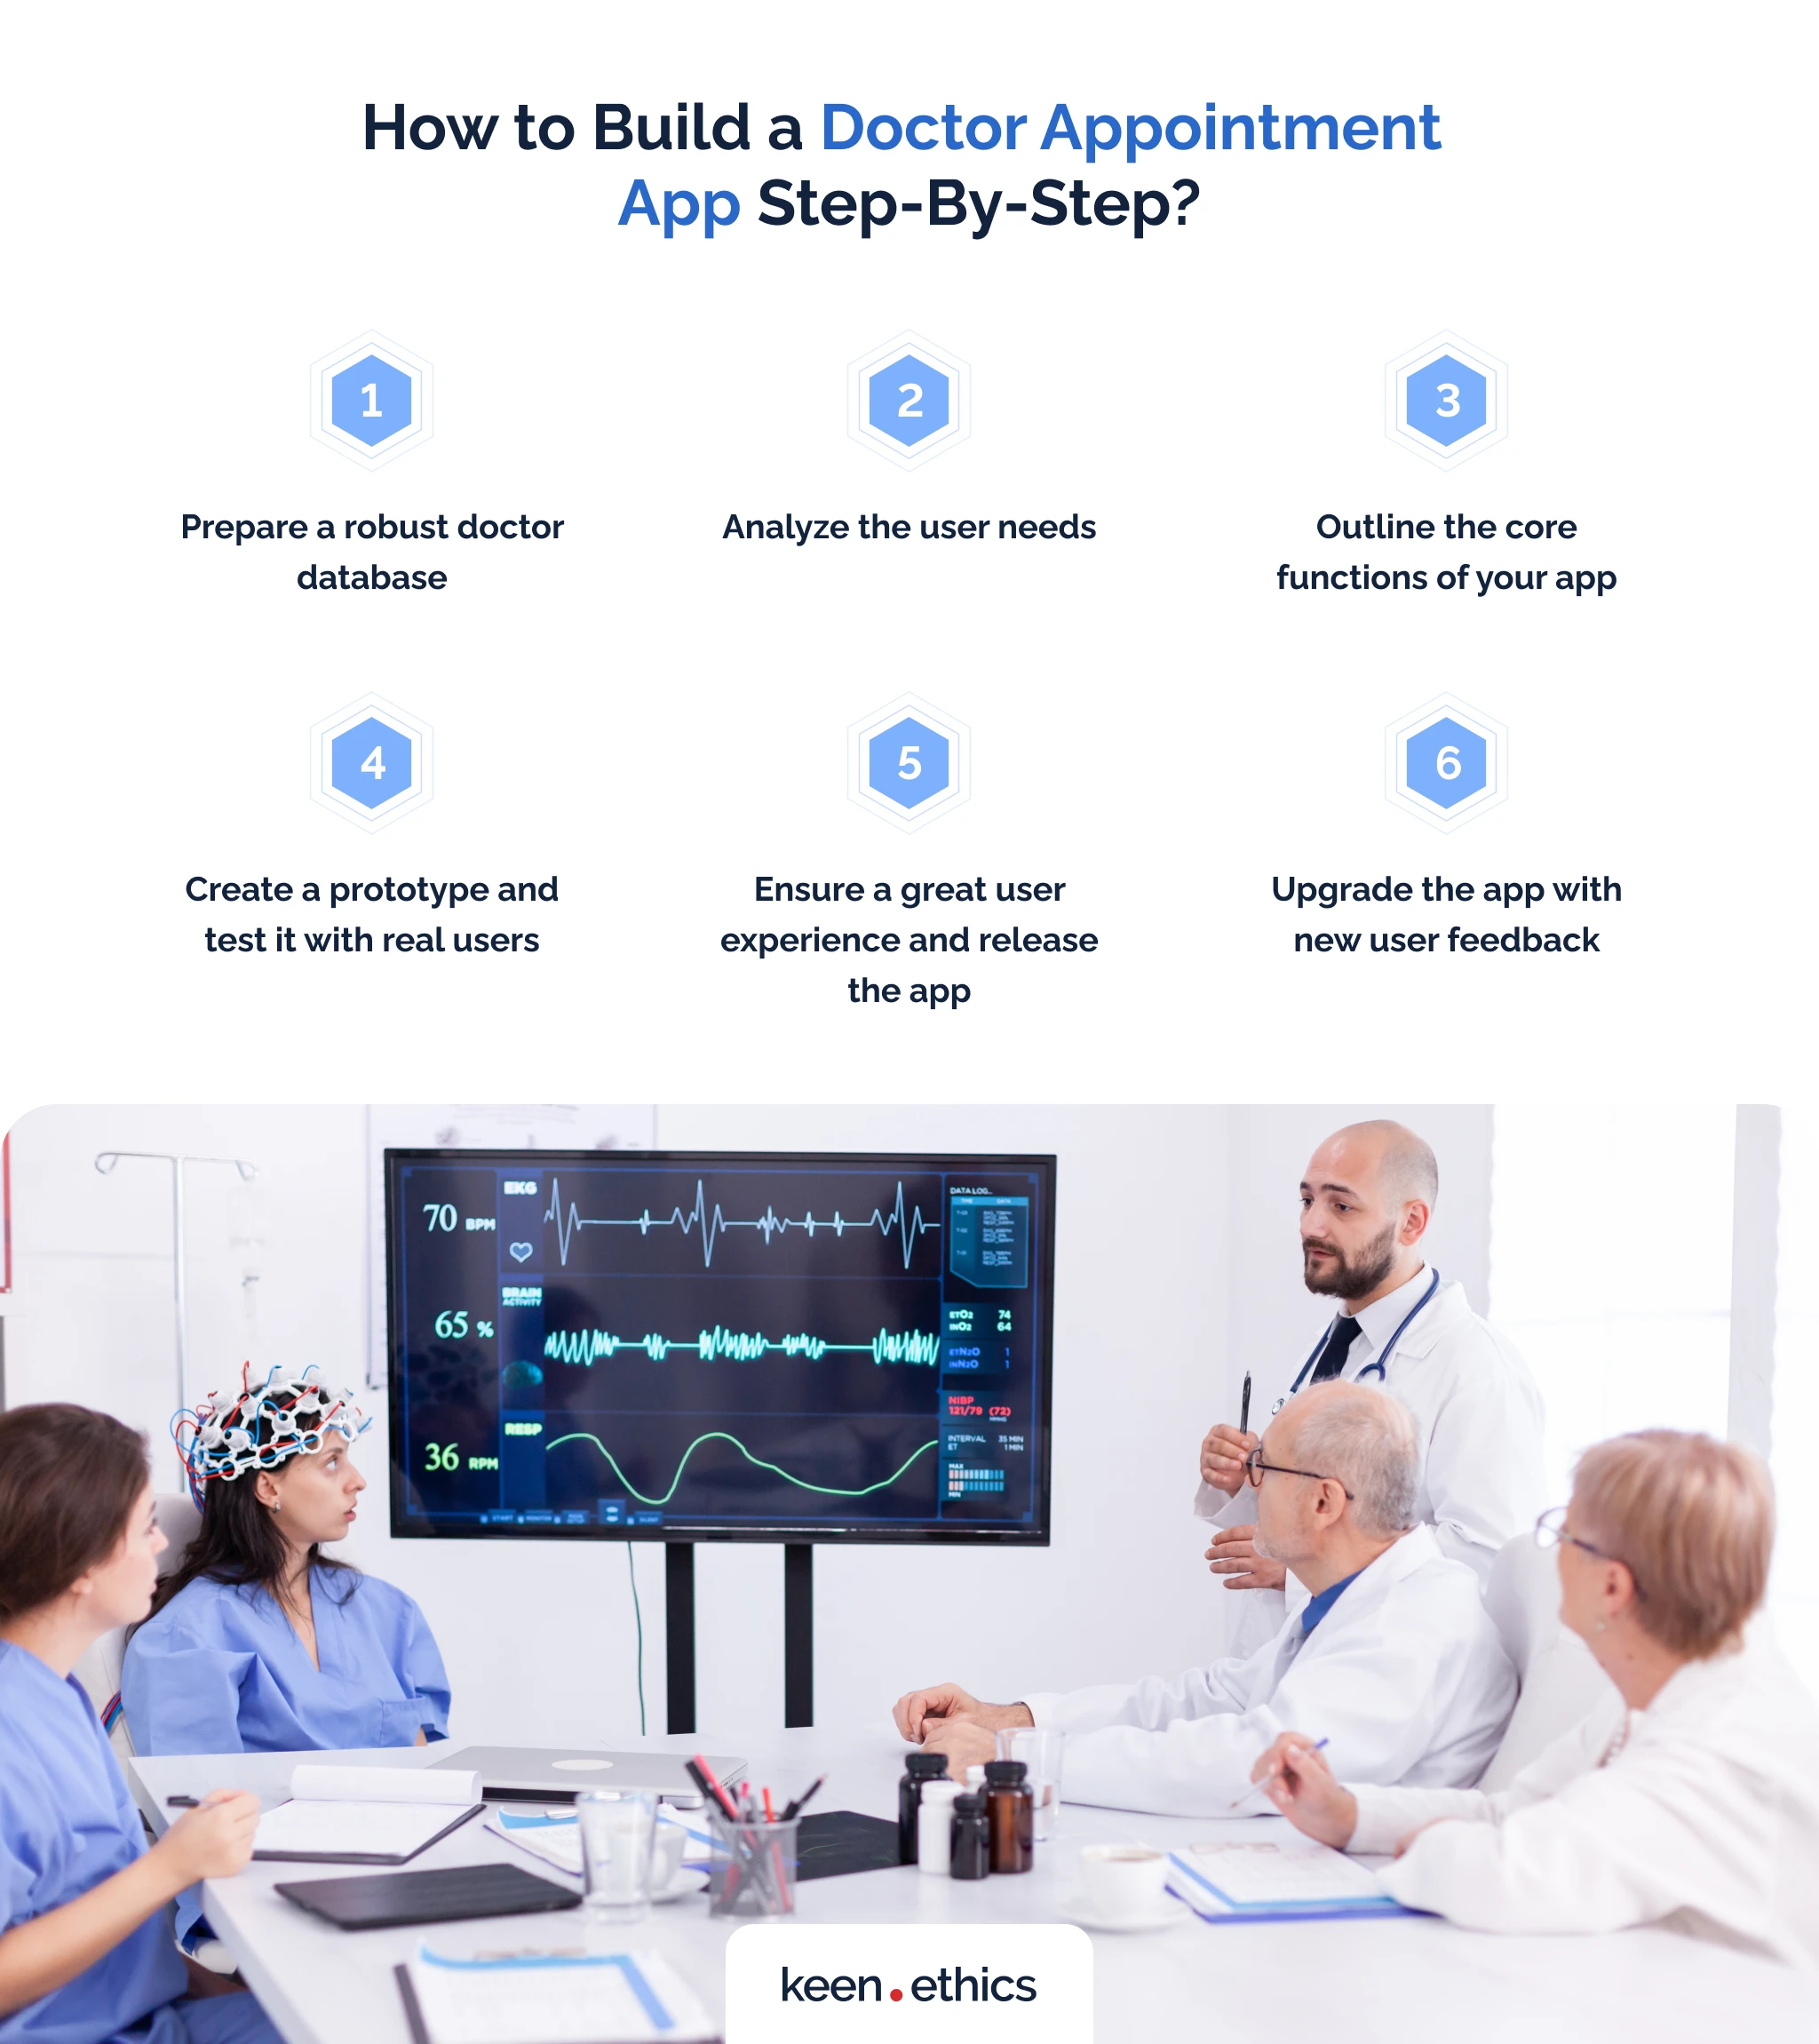 How to build a doctor appointment app step-by-step